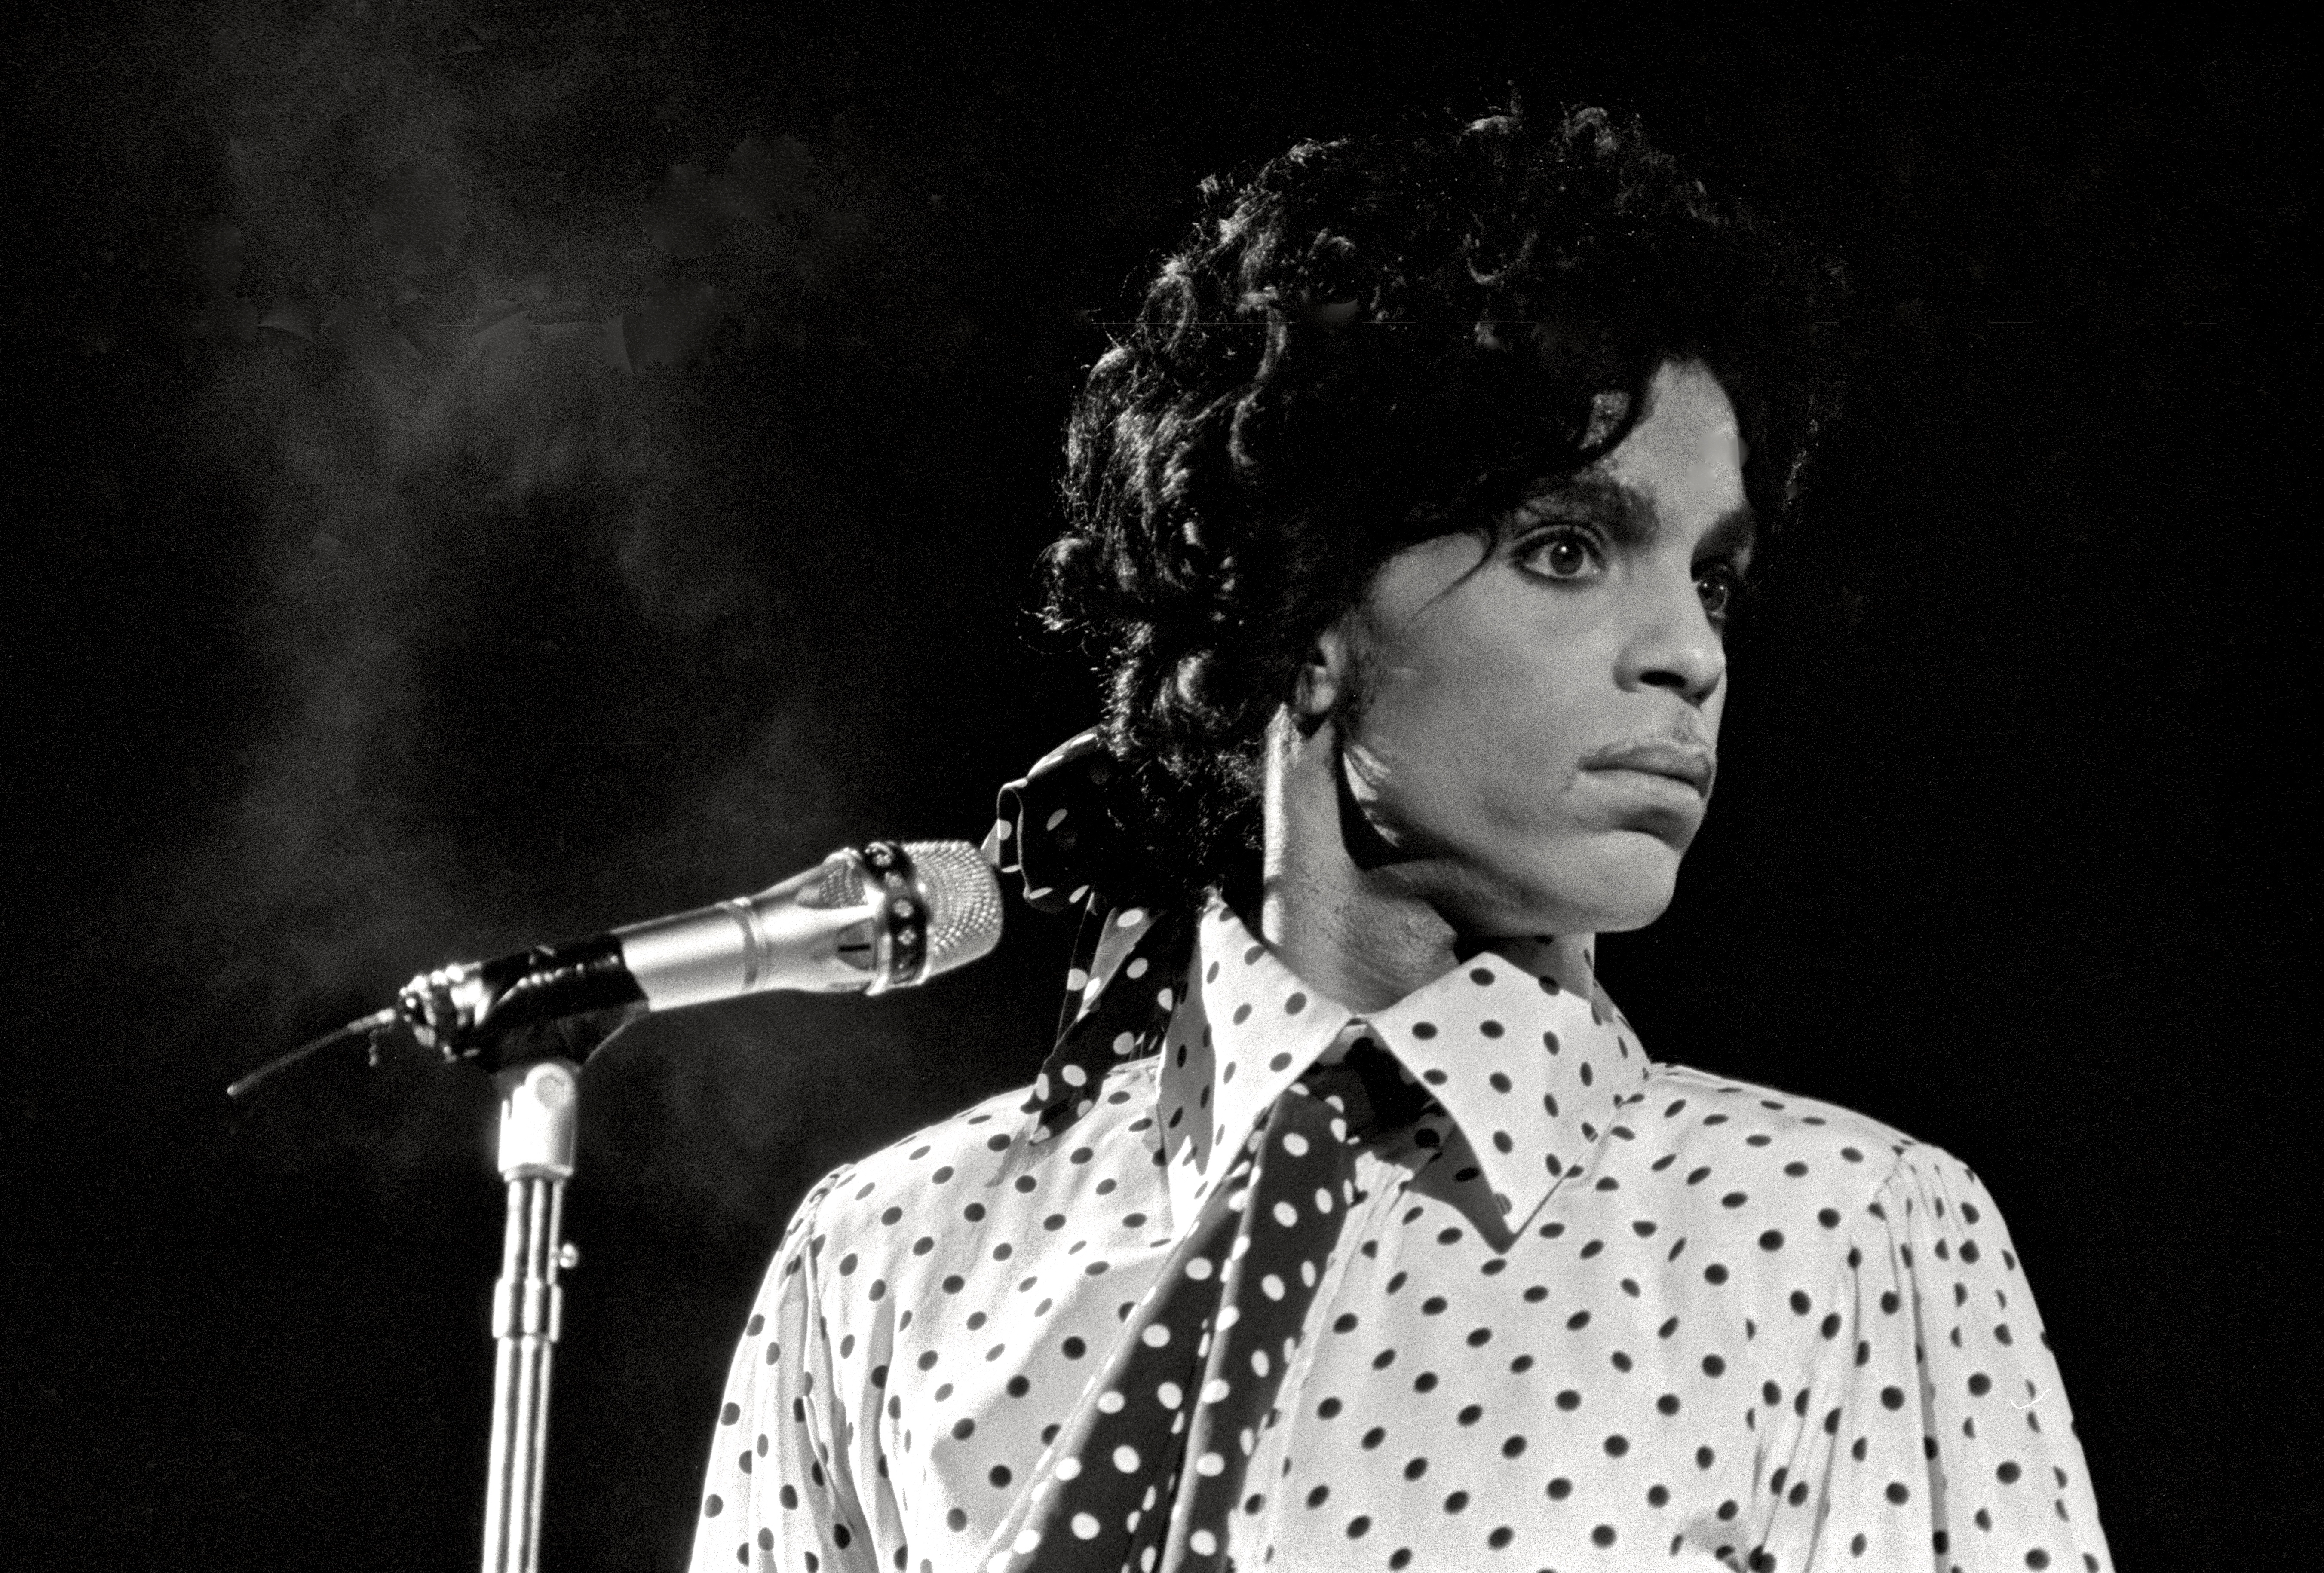 Prince performs during his “Lovesexy World Tour” on November 3, 1988 in Denver, Colorado | Source: Getty Images